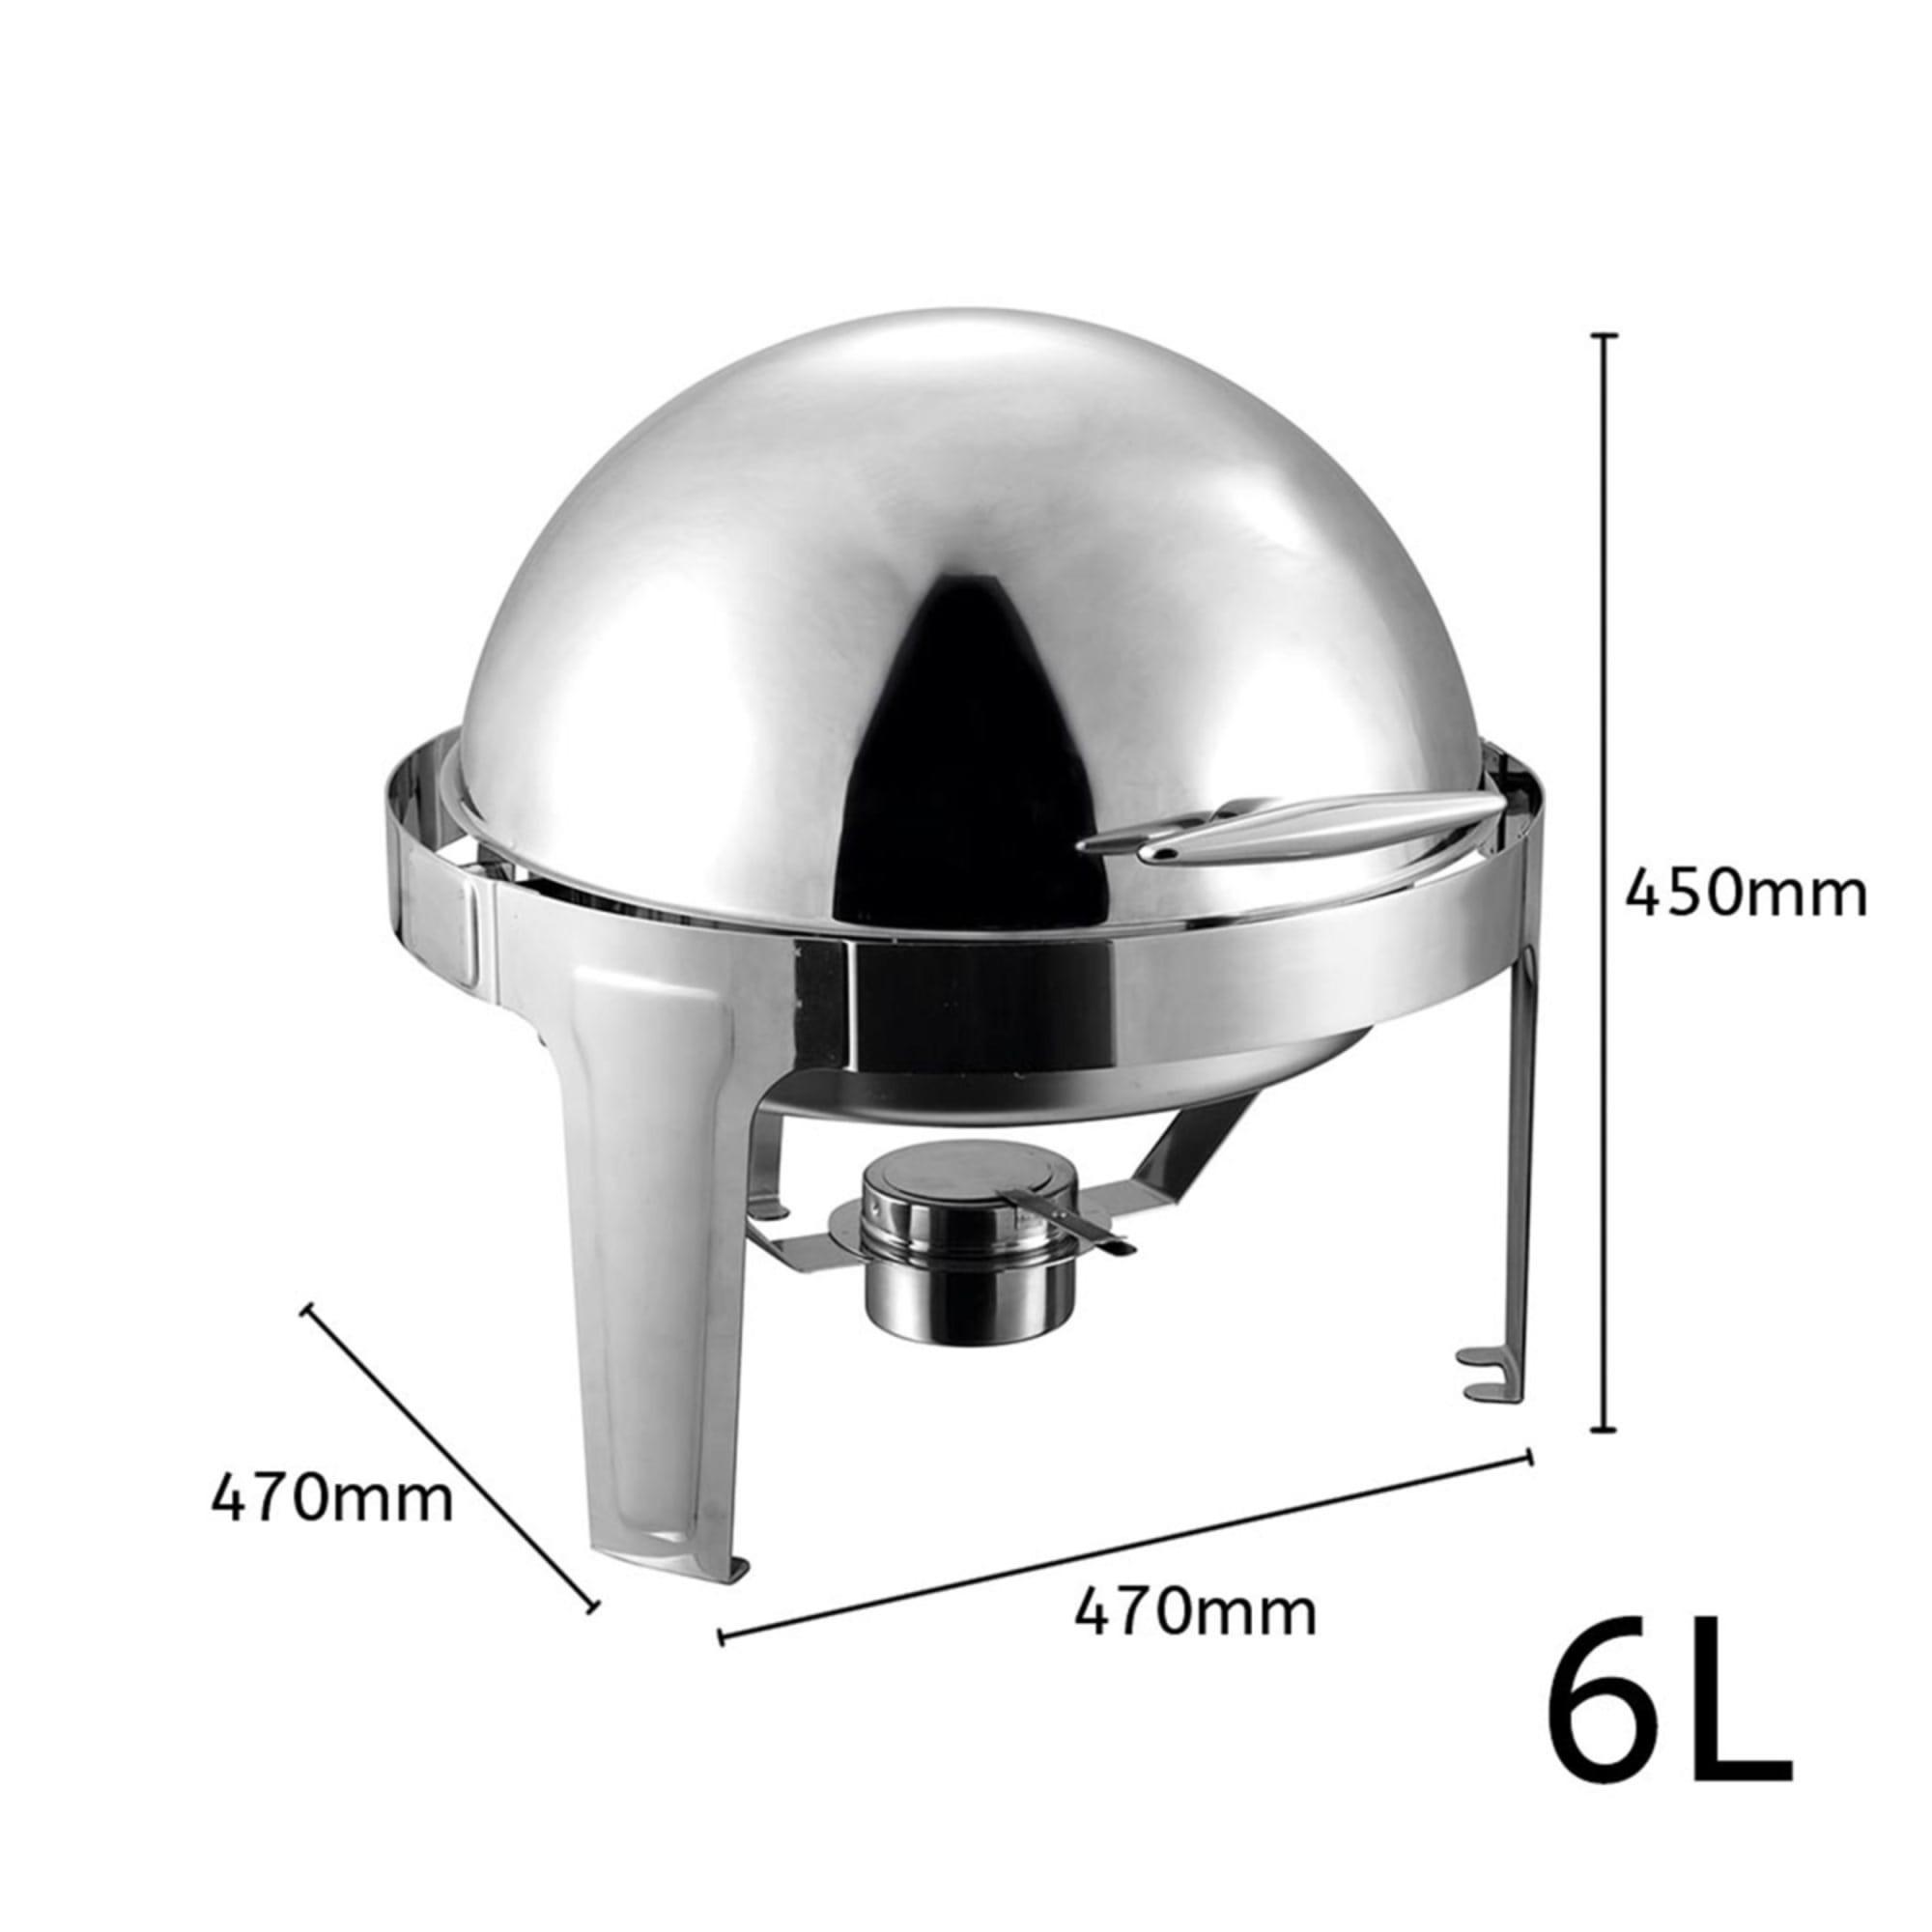 Soga Round Stainless Steel Chafing Dish with Roll Top Set of 2 Image 5